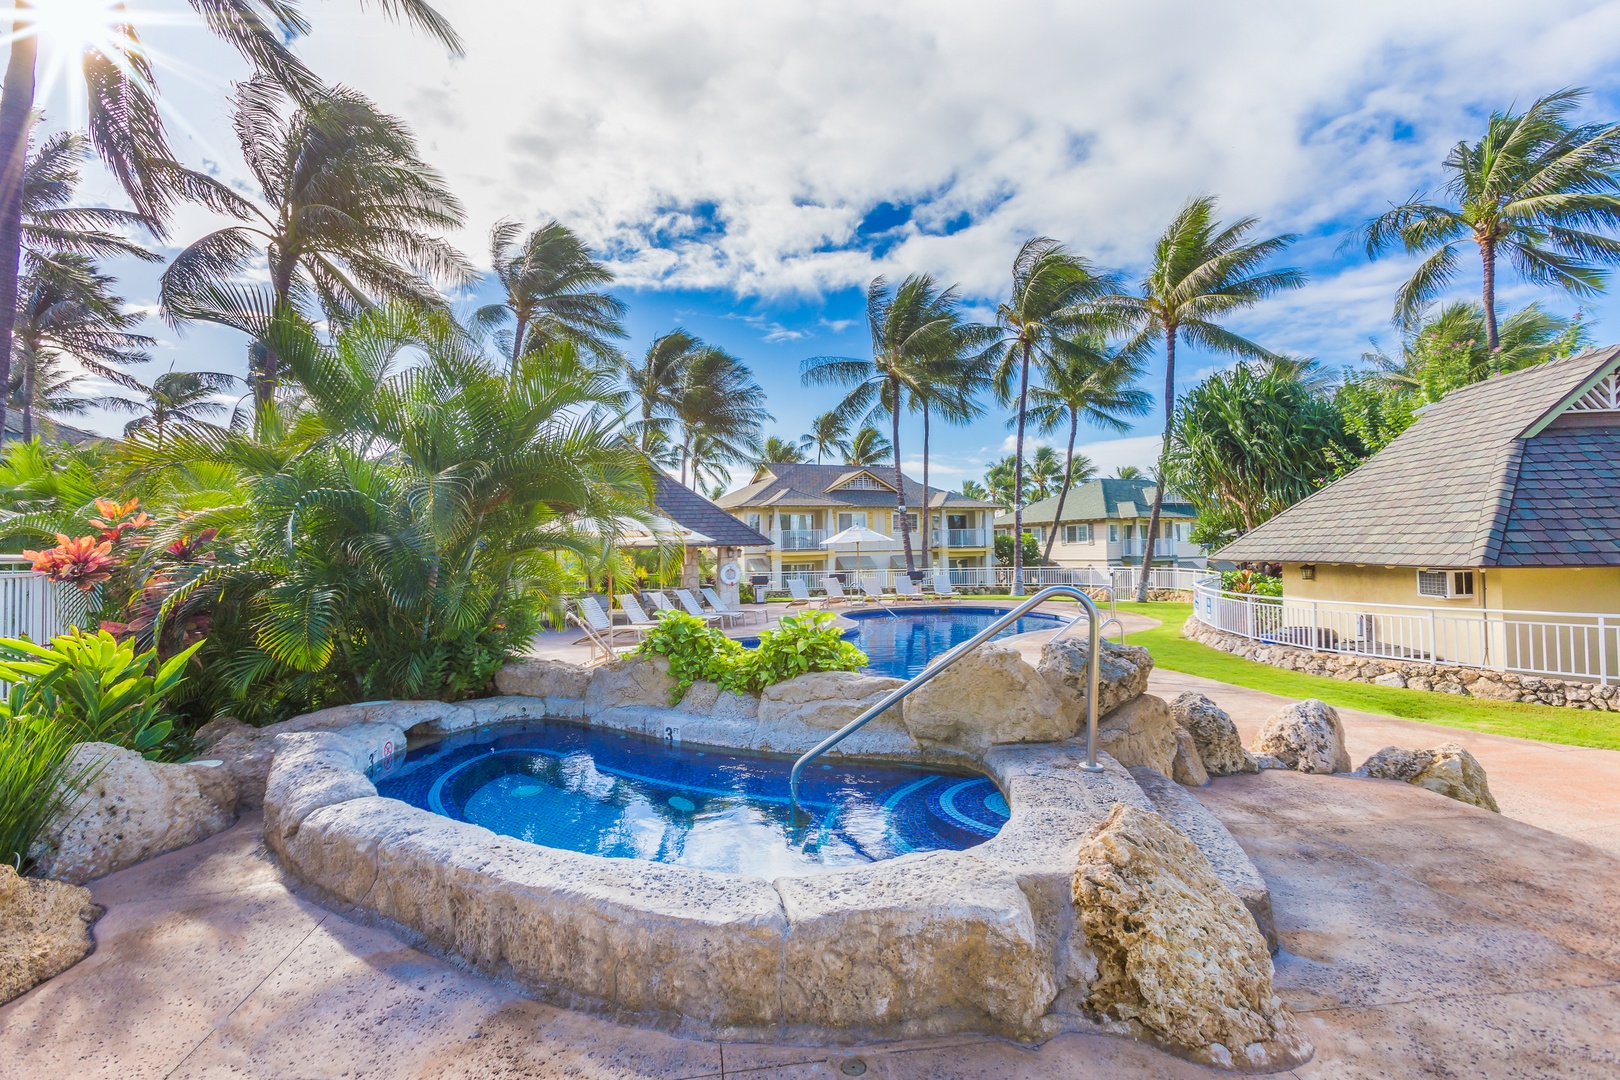 Kapolei Vacation Rentals, Kai Lani 12D - Relax in the hot tub in the center of the palm fringed Fairways at Ko Olina.